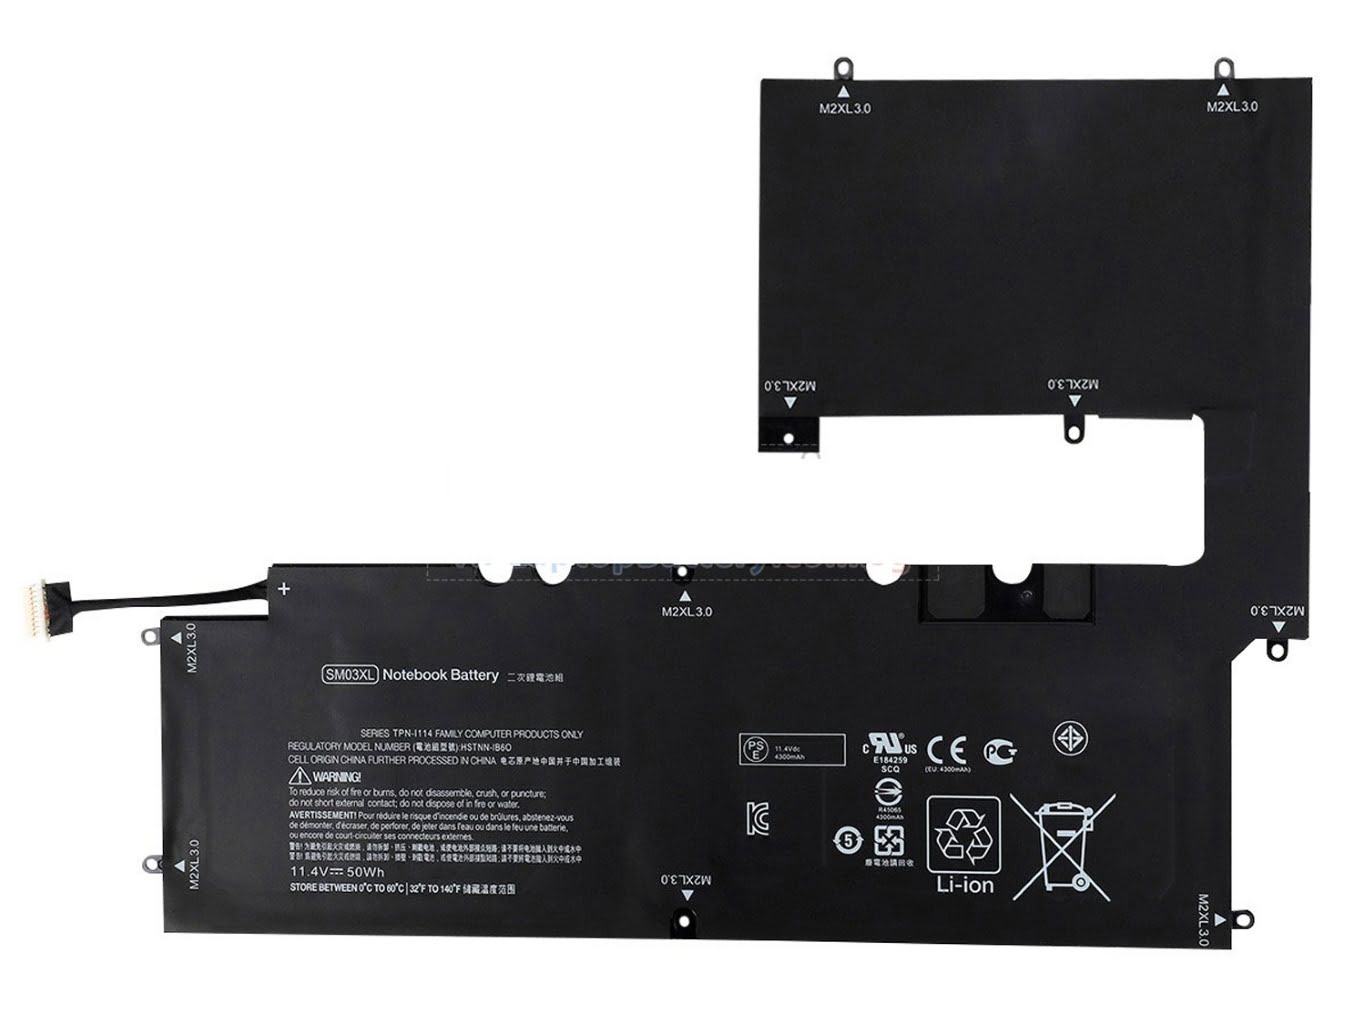 466802-121, 766802-121 replacement Laptop Battery for HP Envy X2 15-C, Envy x2 15-c000, 11.4v, 50wh